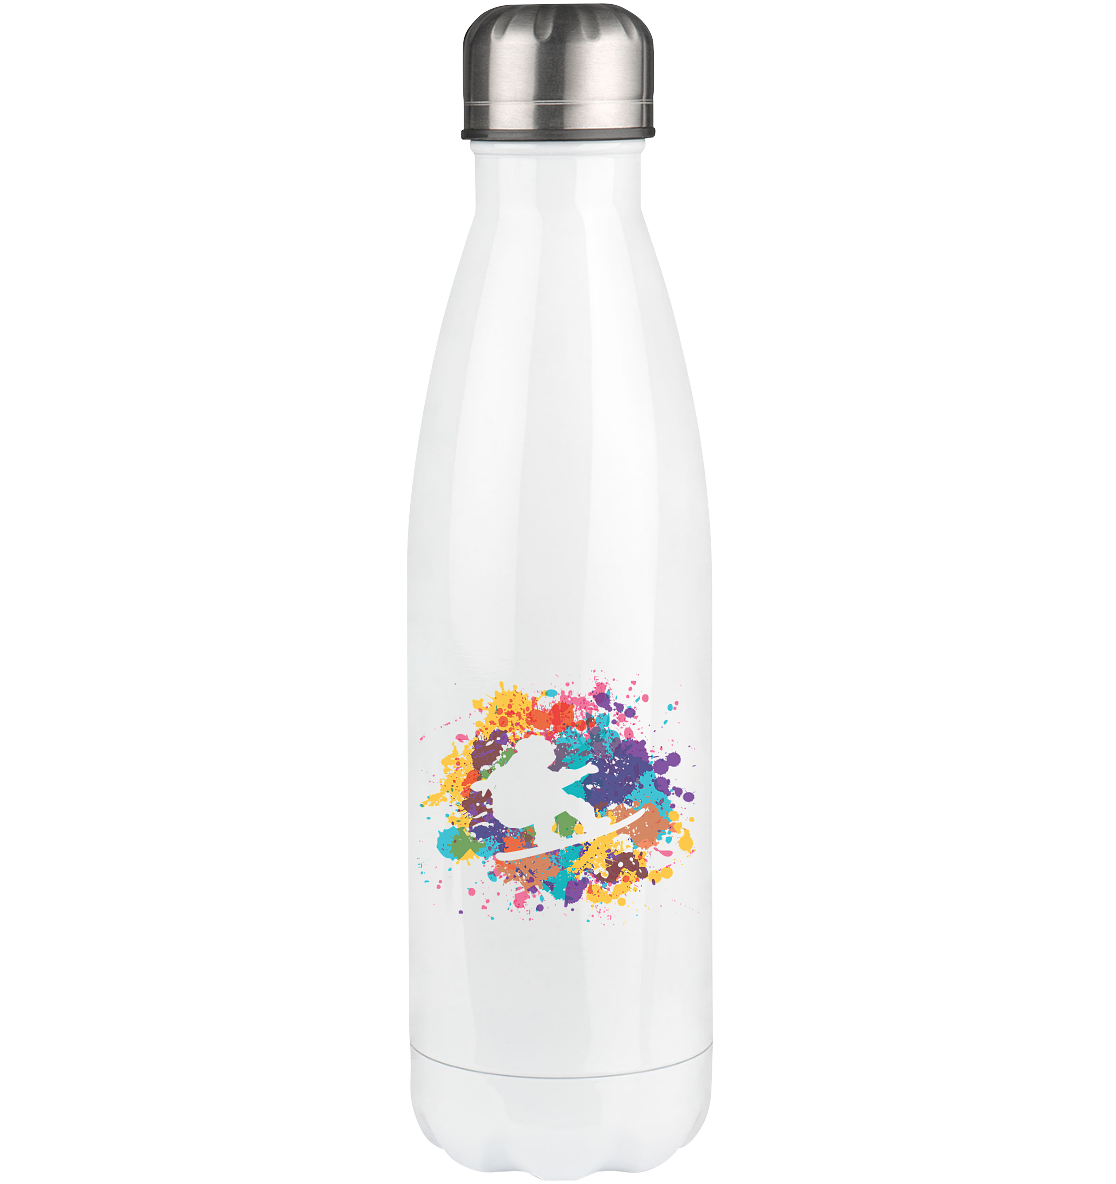 Colorful Splash and Snowboarding - Edelstahl Thermosflasche snowboarden 500ml